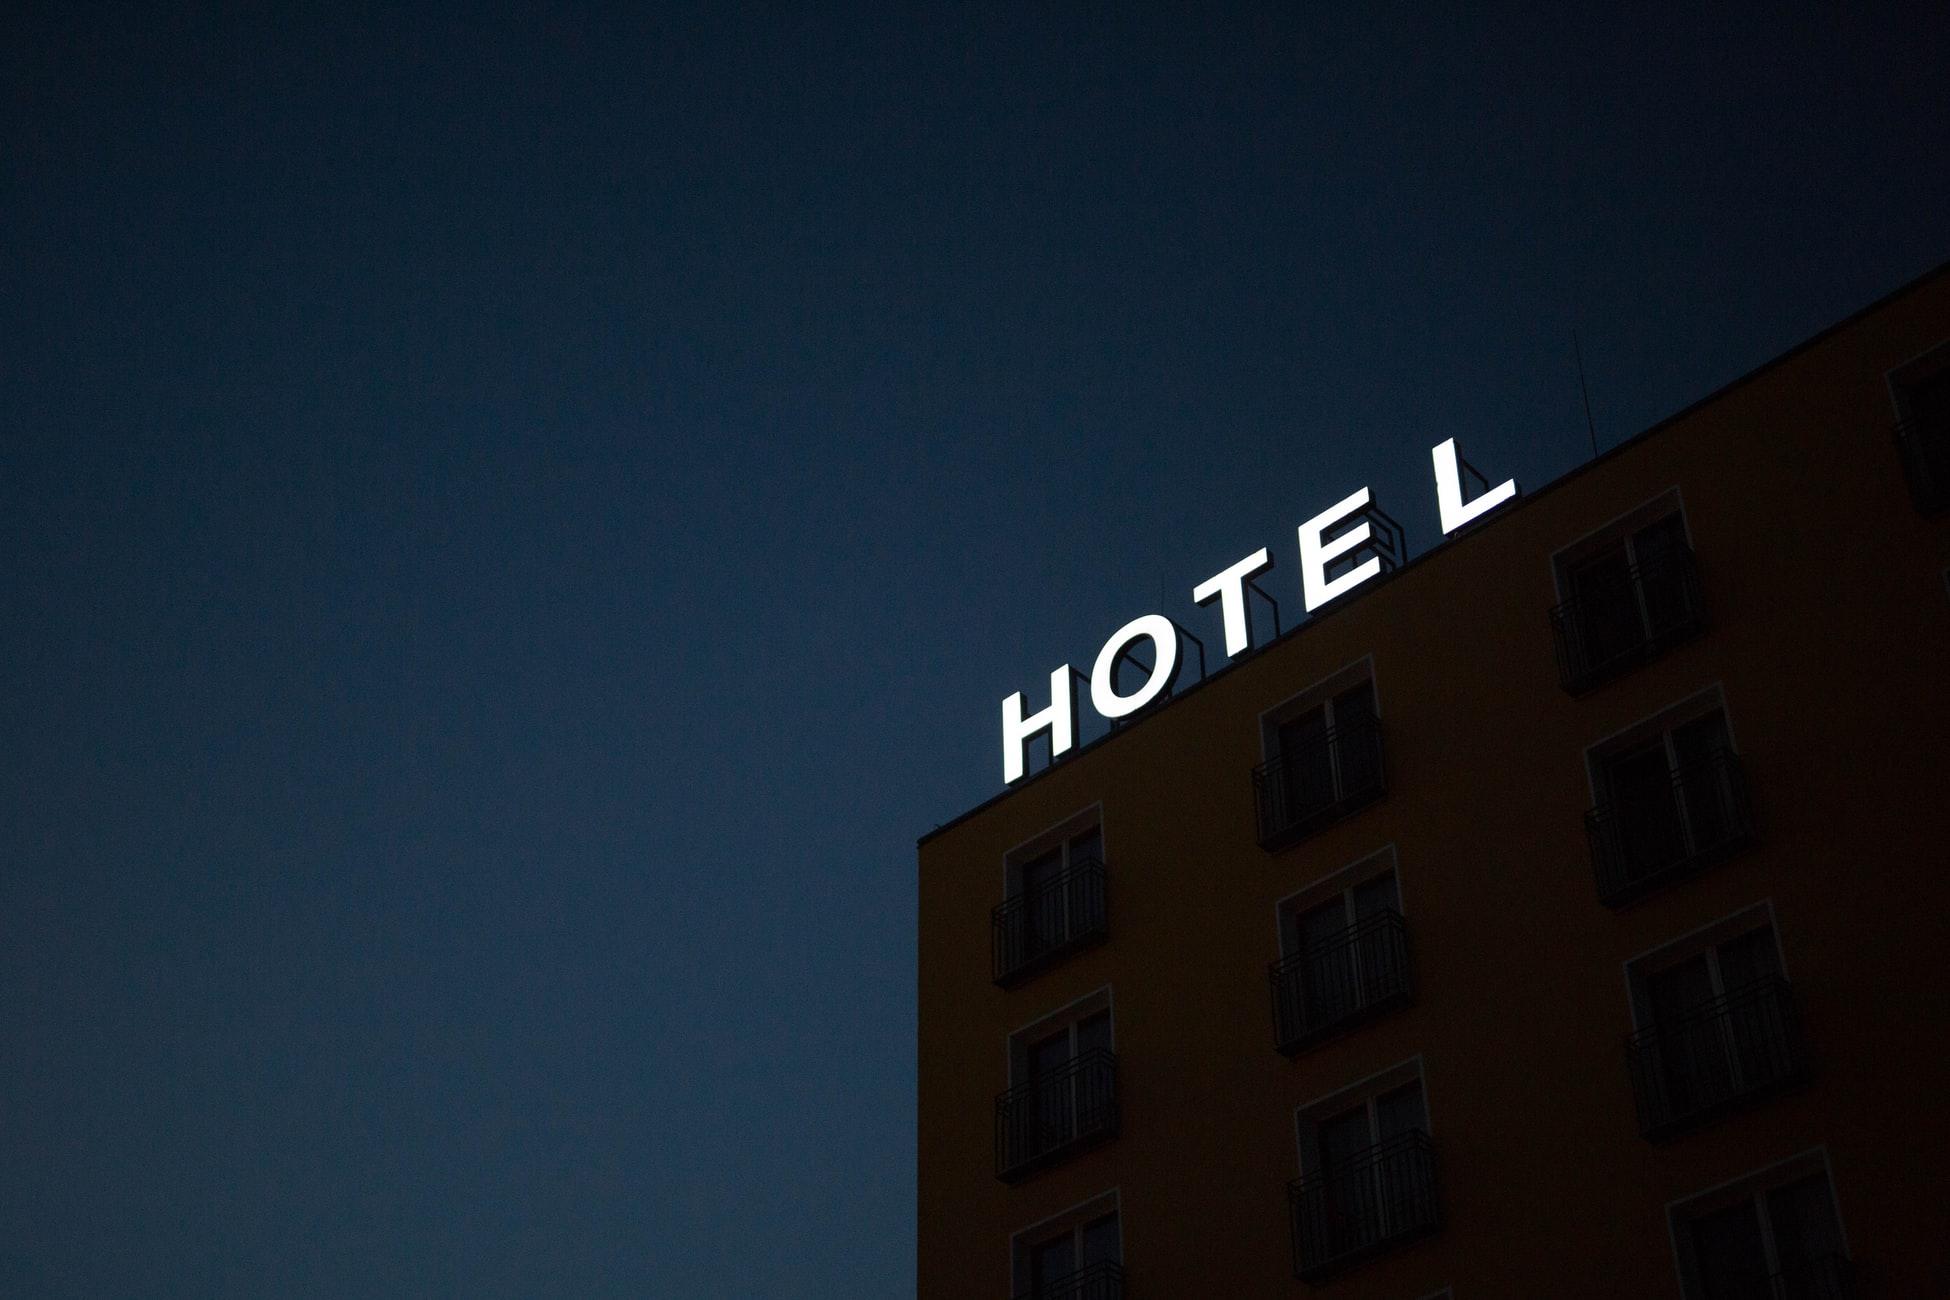 Hotel sign during winter